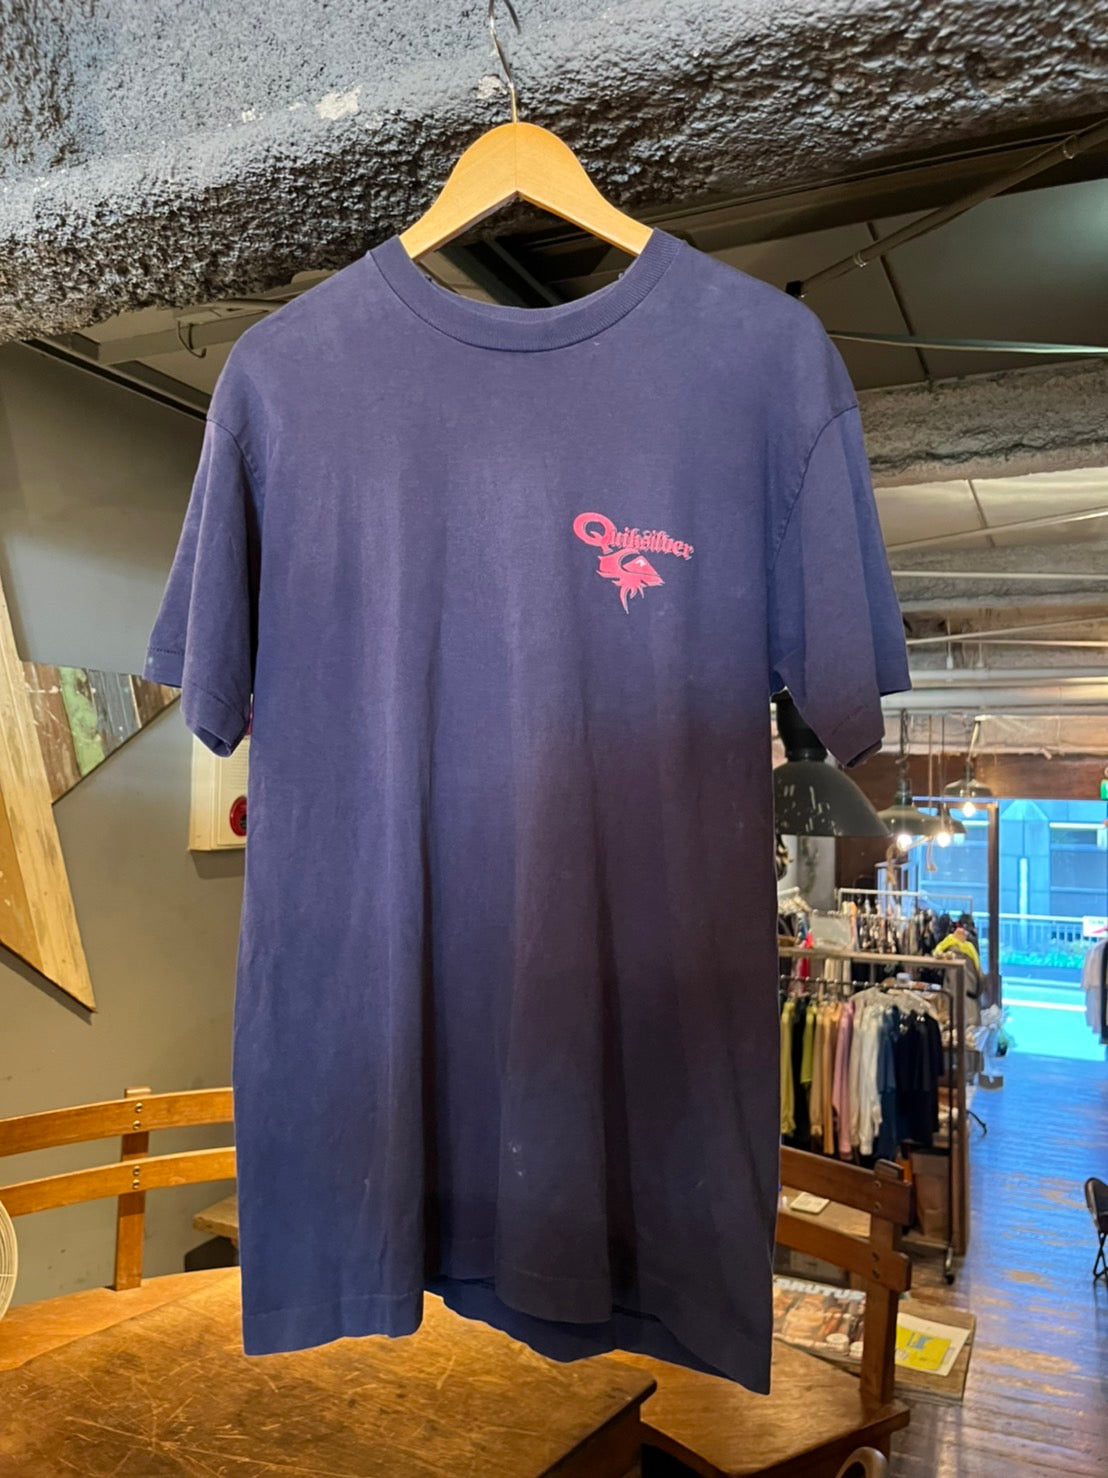 【Quiksilver】90's vintage Quiksilver surf skate  t-shirt made in Canada (men's L)